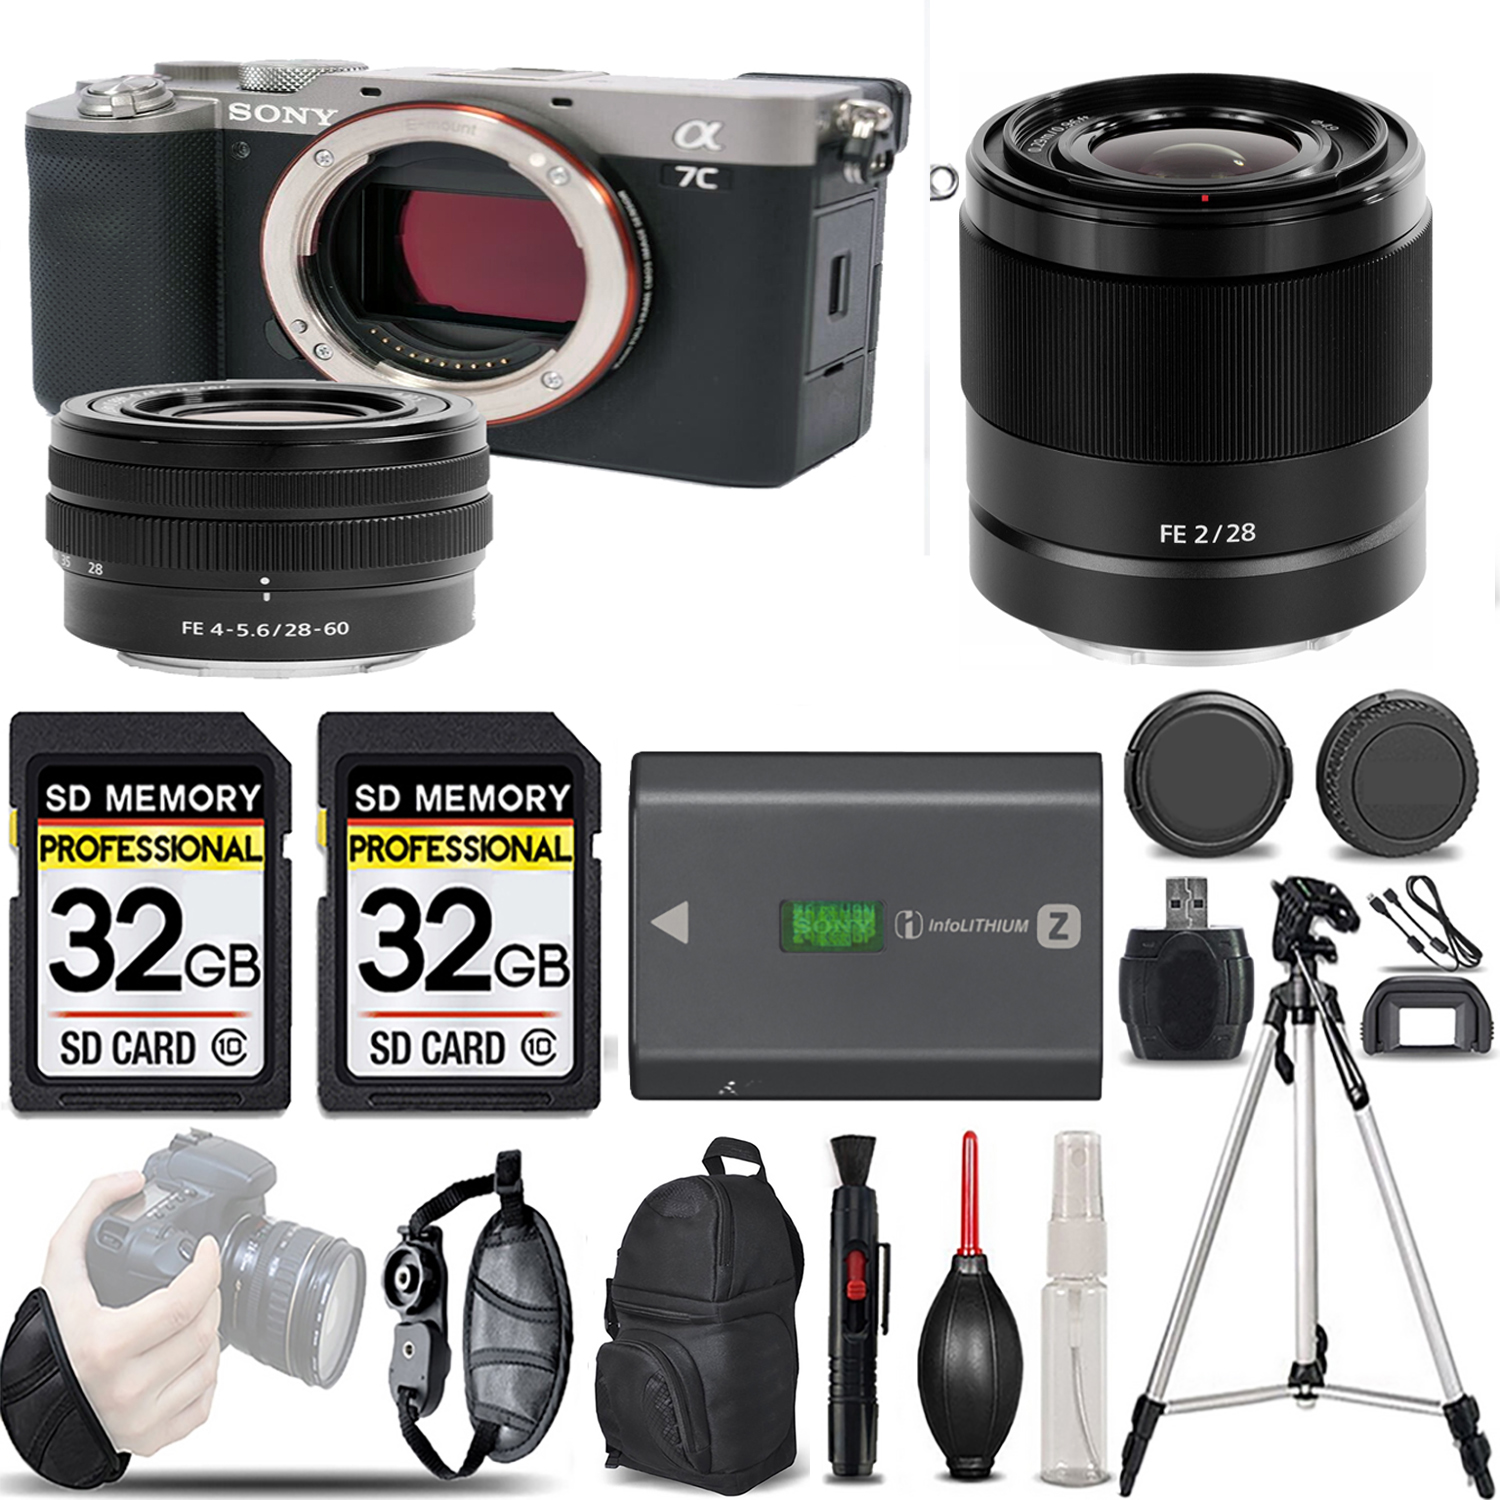 Alpha a7C Mirrorless Camera (Silver) + 28-60mm Lens + 28mm f/2 Lens - LOADED KIT *FREE SHIPPING*